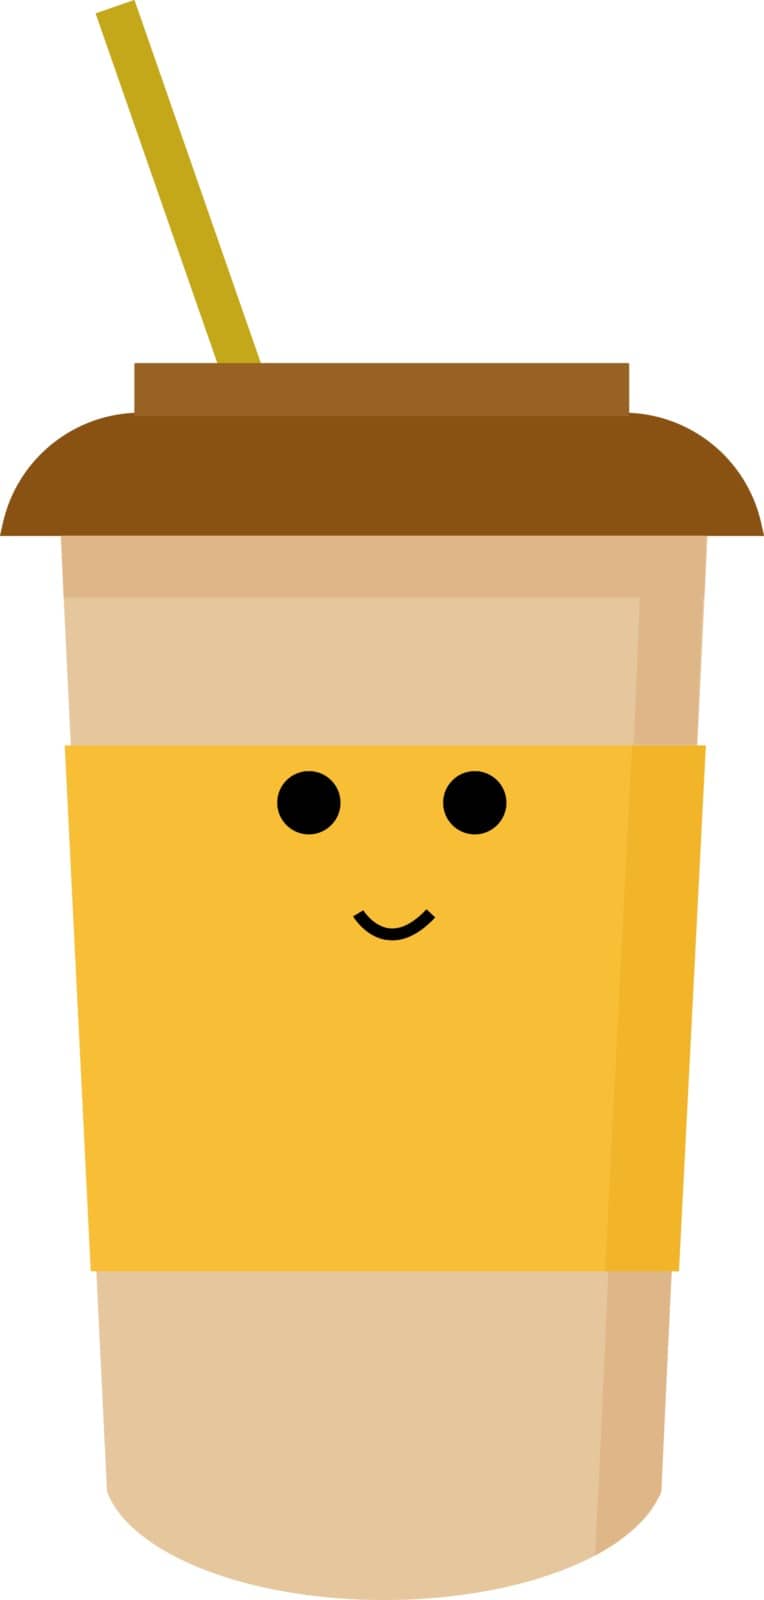 Coffee to go, illustration, vector on white background.